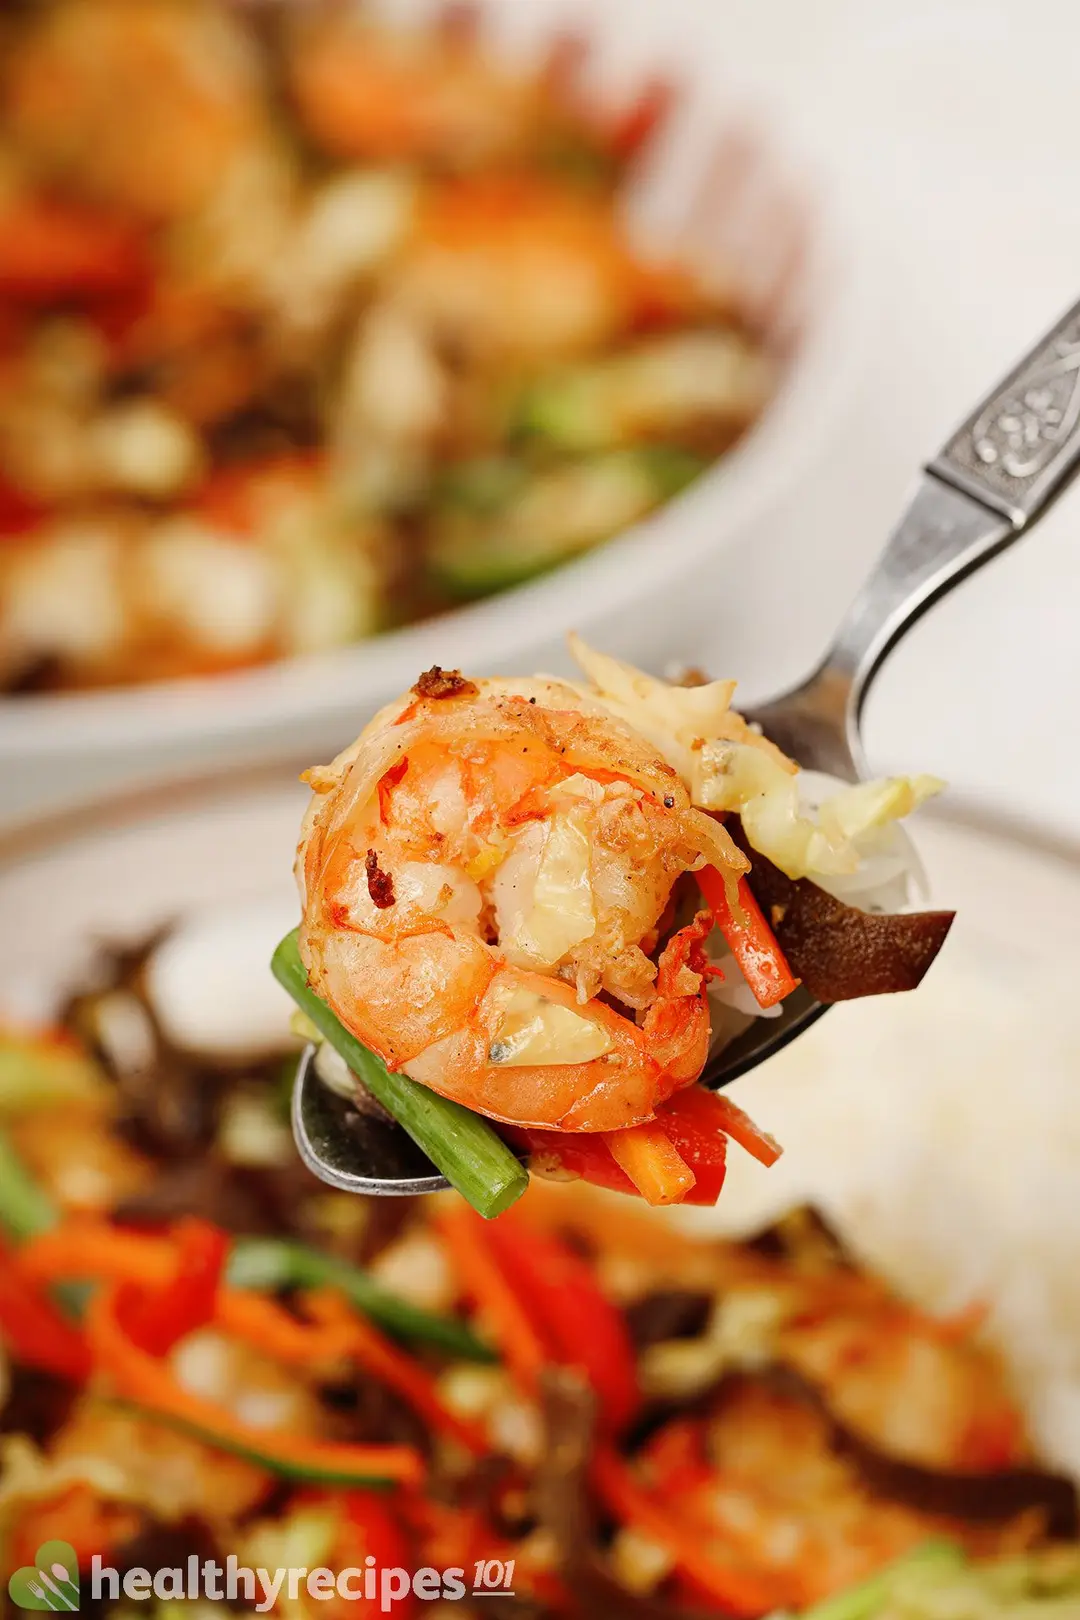 A spoon holding a piece of cooked shrimp, with colorful plates of vegetable saute in the background